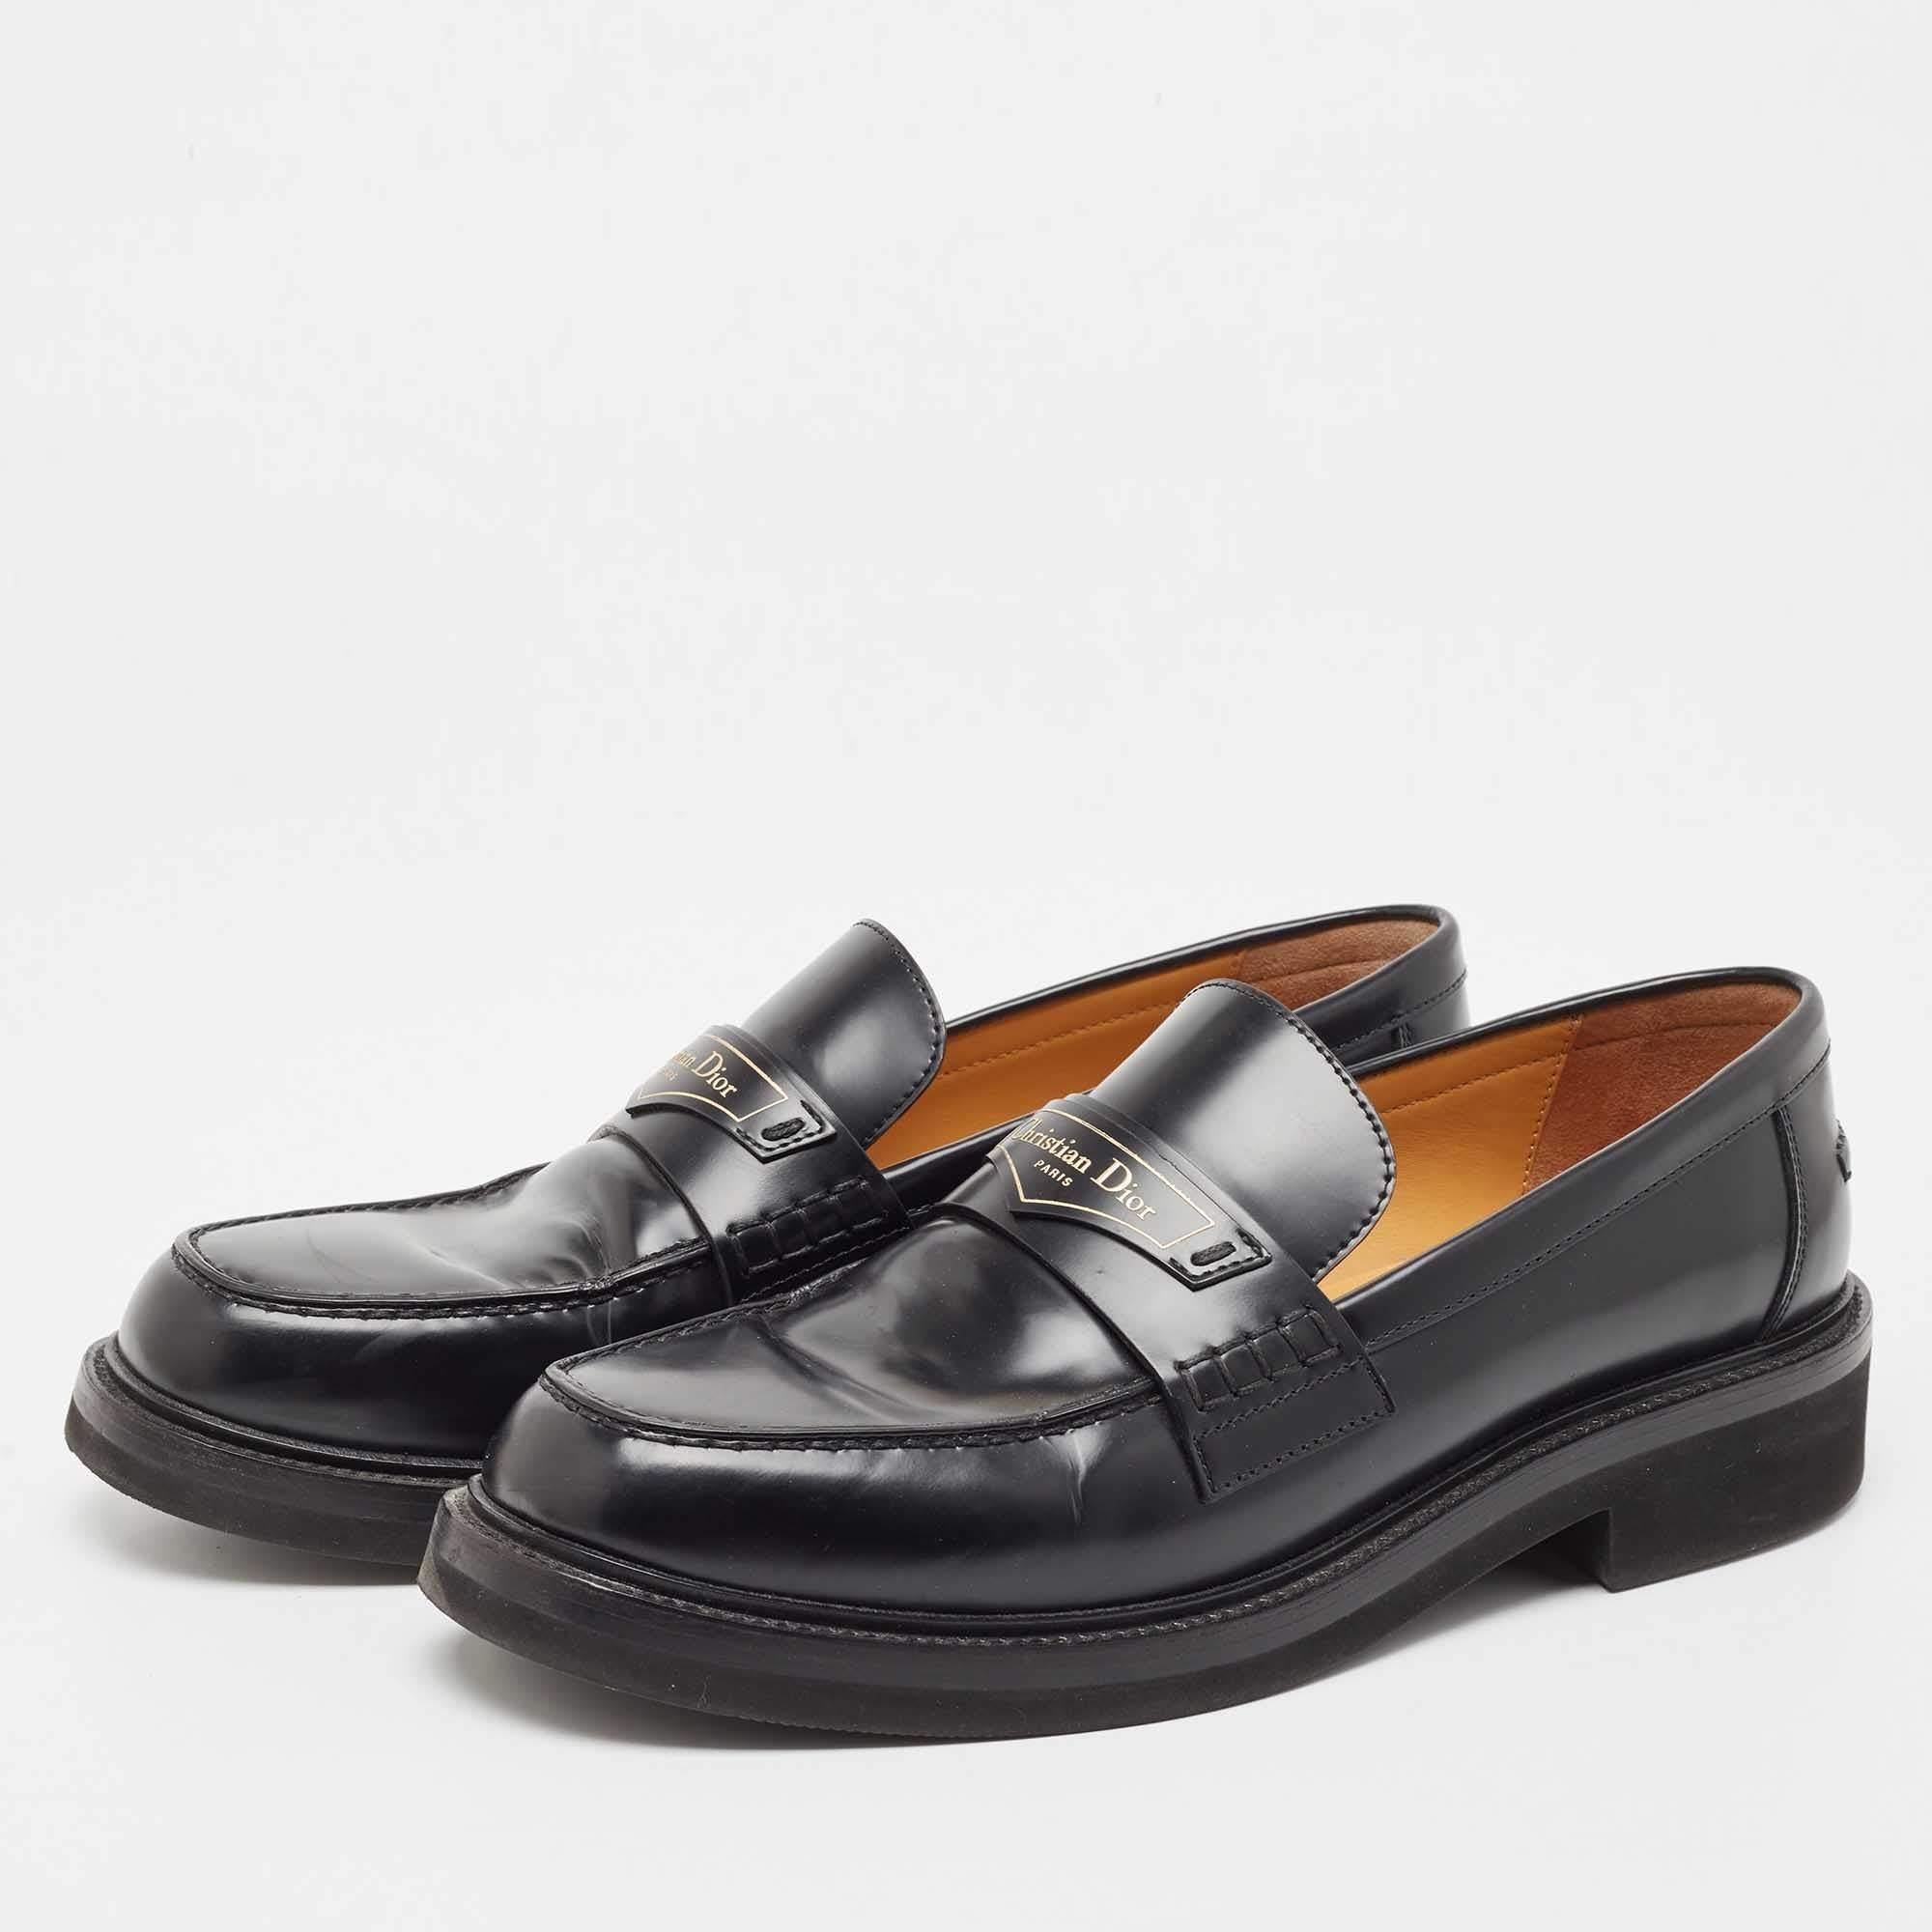 Dior Black Leather Boy Loafers Size 41 1